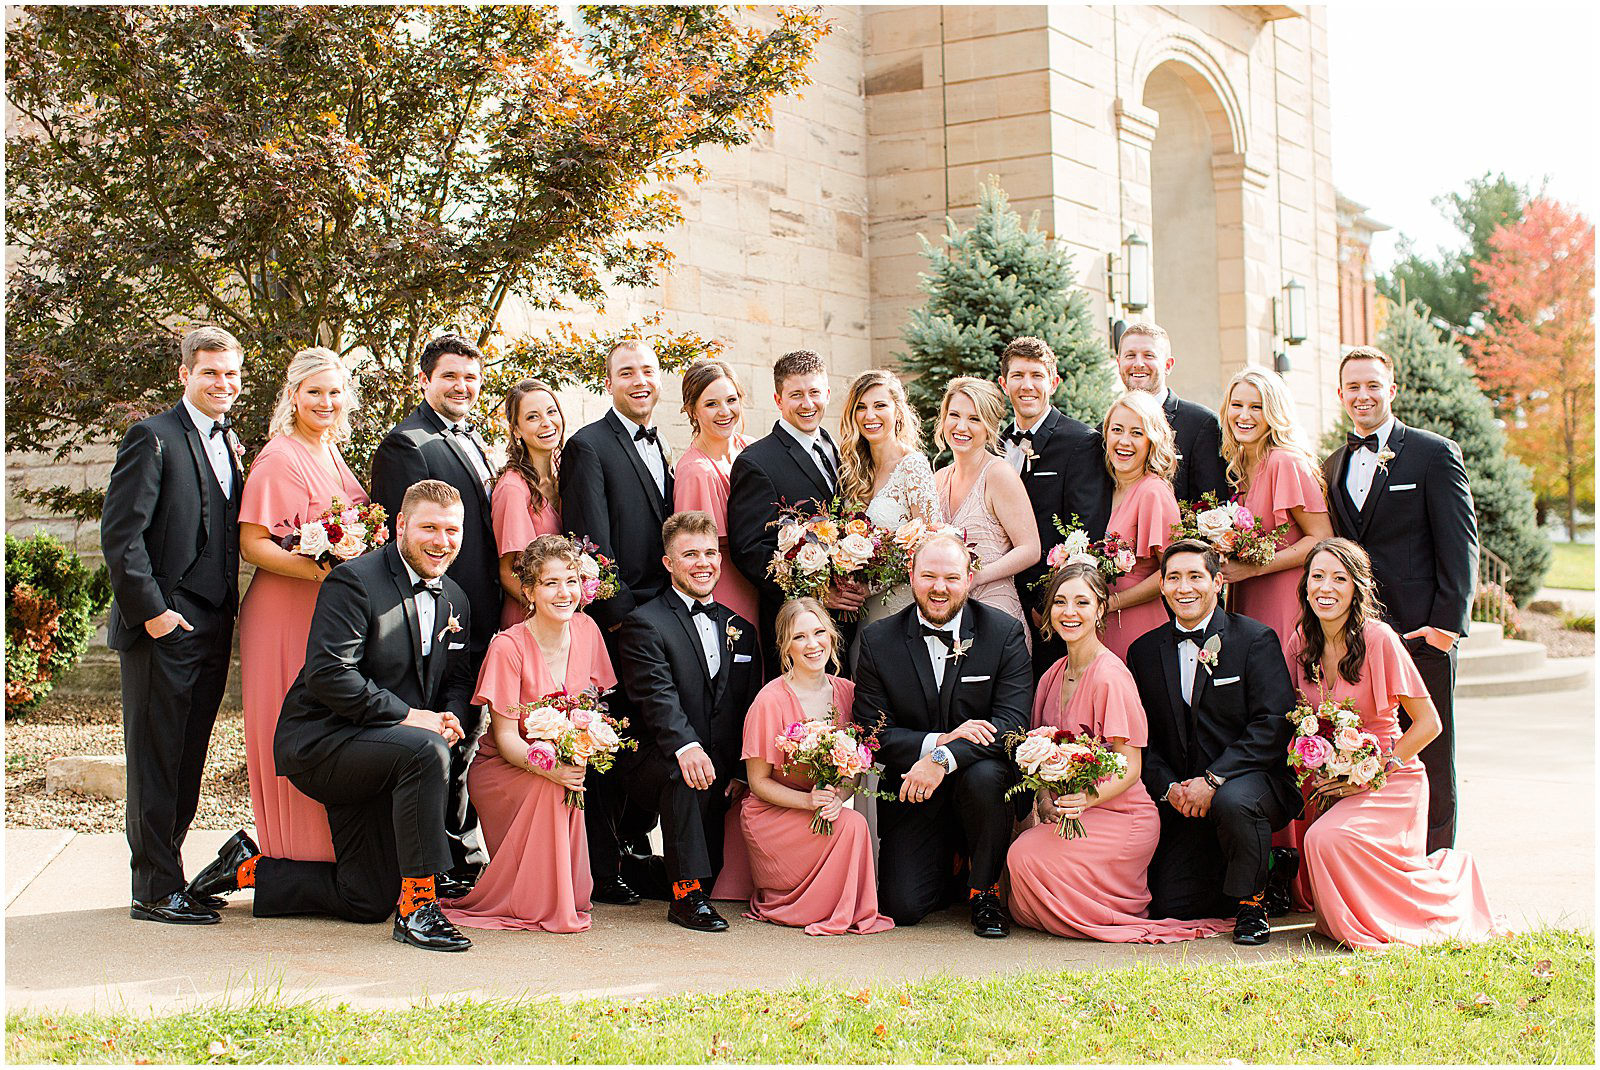 A Romantic Fall Wedding in Ferdinand, IN | Tori and Kyle | Bret and Brandie Photography 0098.jpg